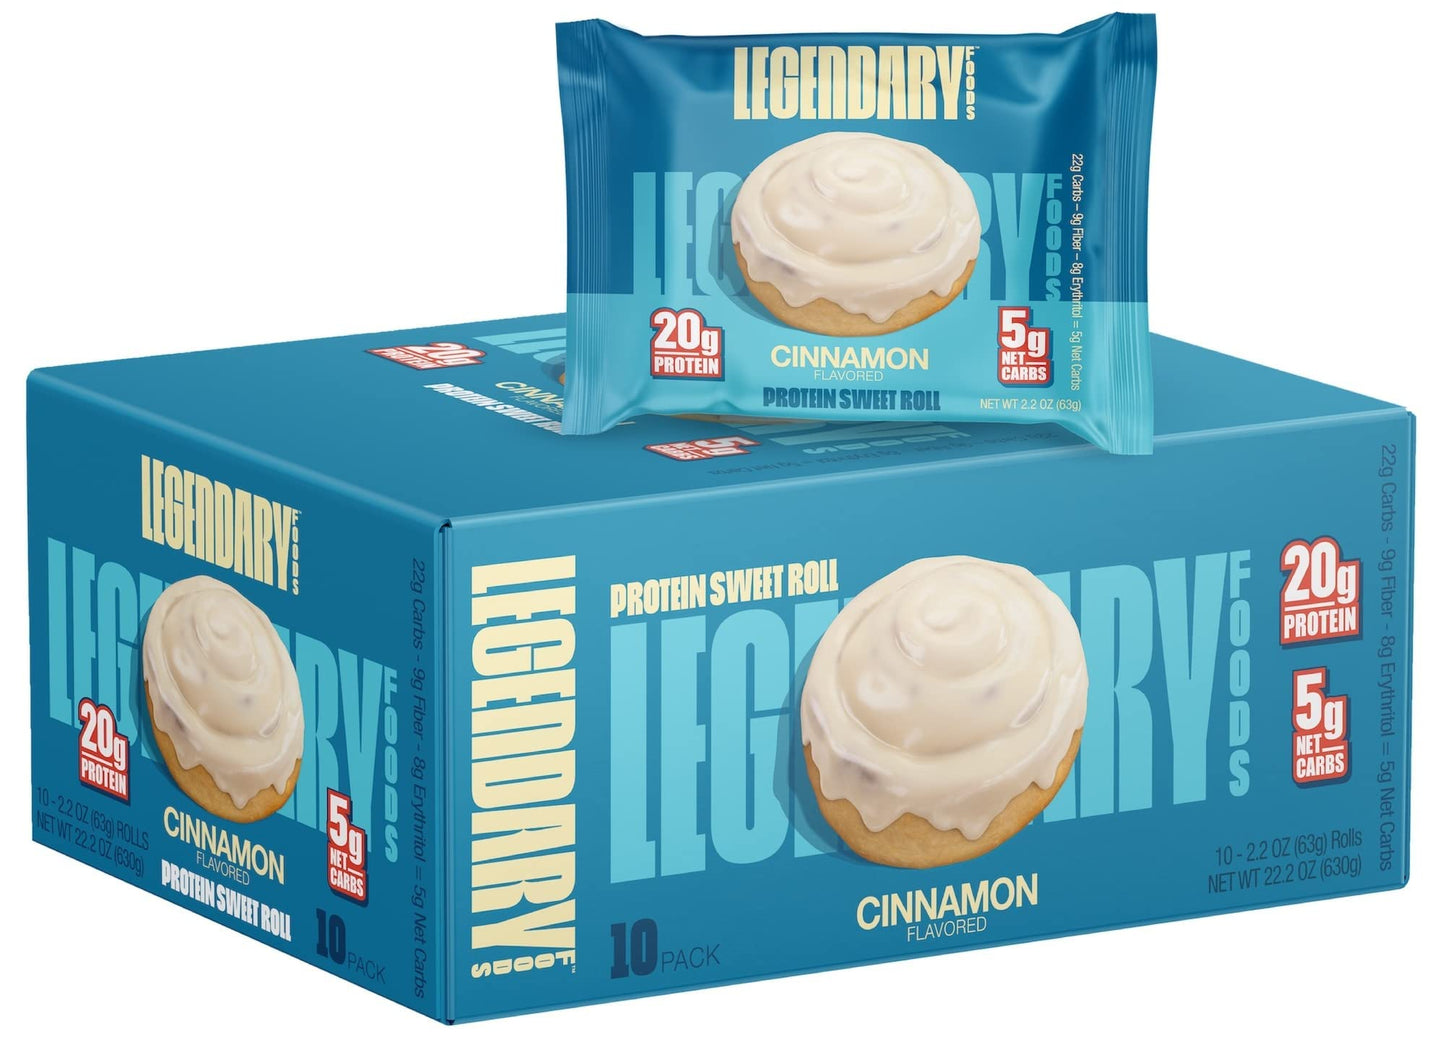 Legendary Foods High Protein Snack Cinnamon Sweet Roll, 20 Gr Protein Bar Alternative, Low Carb Food, Low Sugar and Gluten Free Keto Breakfast Snack, Healthy and Keto Friendly Cinnamon Rolls (10-pack)